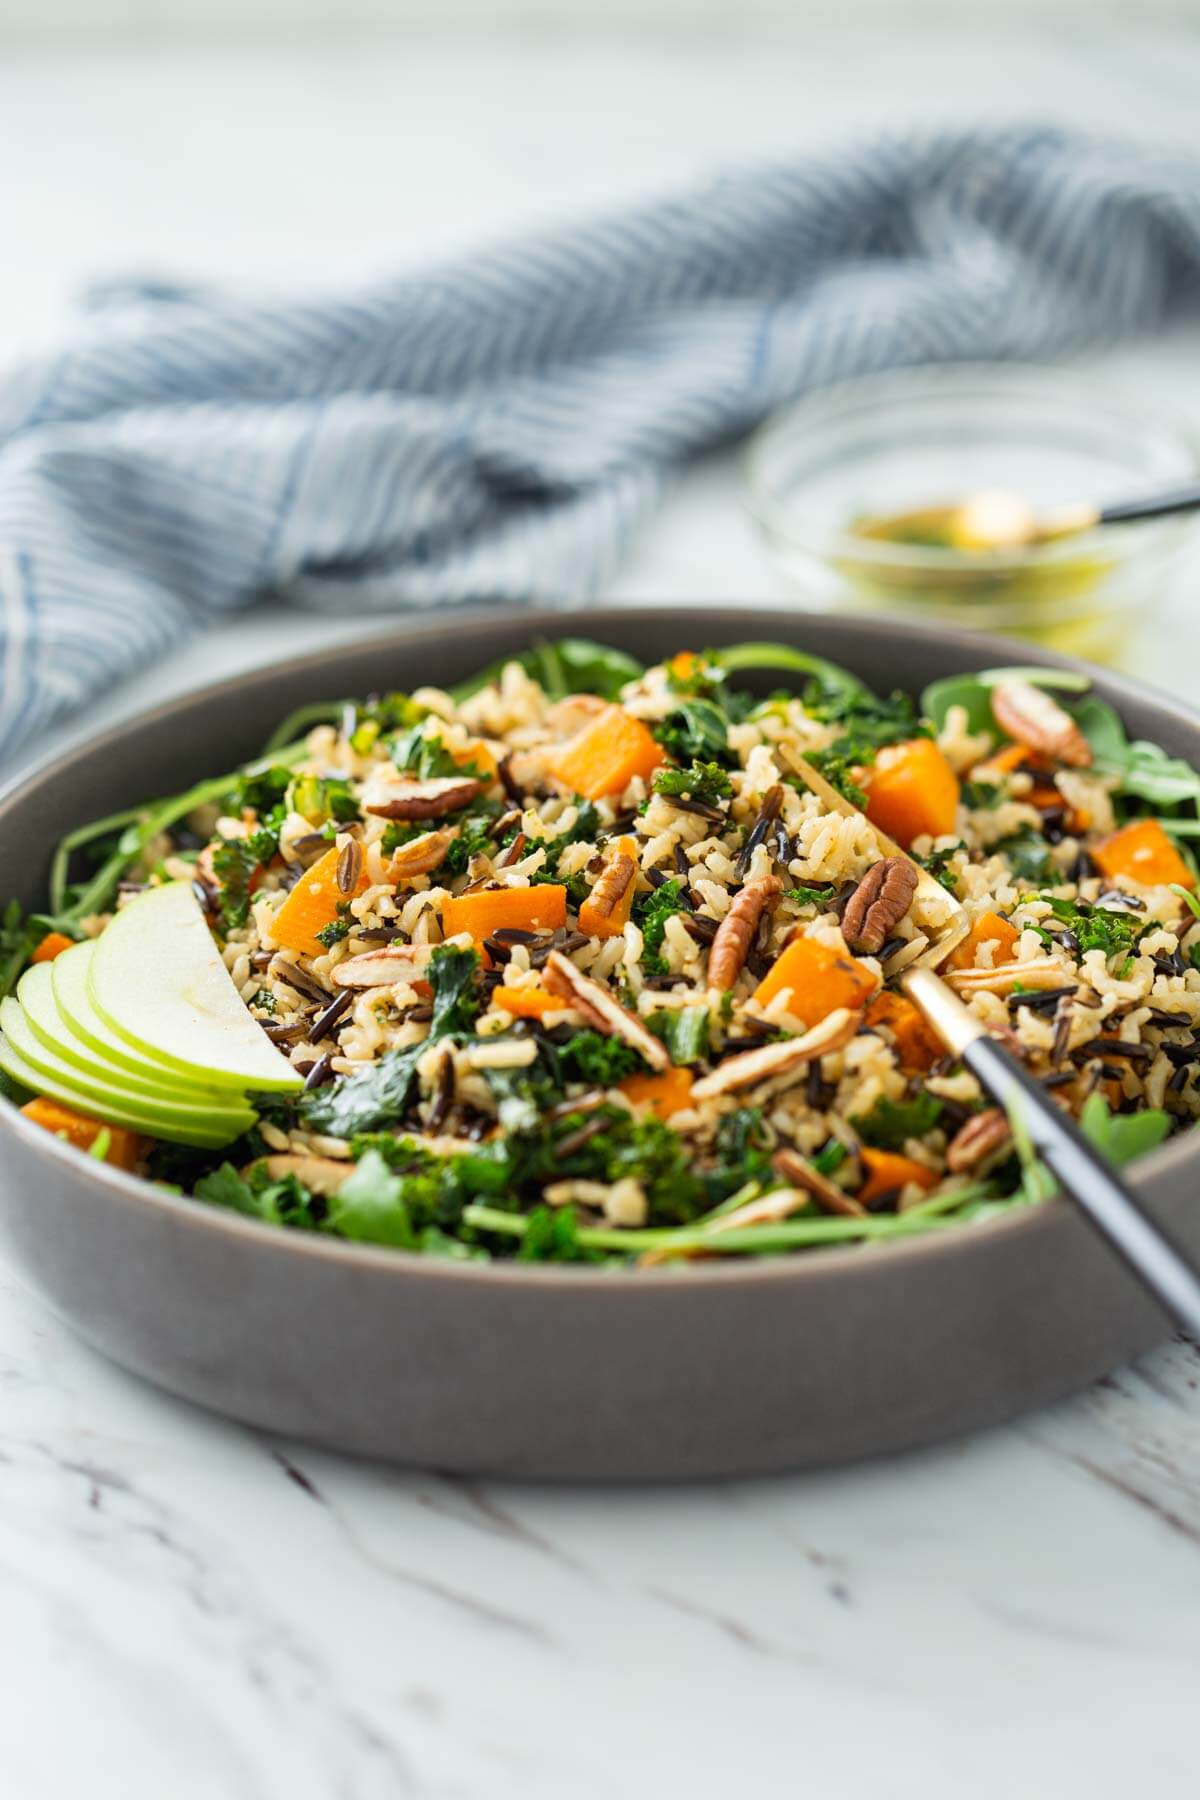 wild rice salad with sweet potato, kale and arugula in a serving bowl with serving fork.